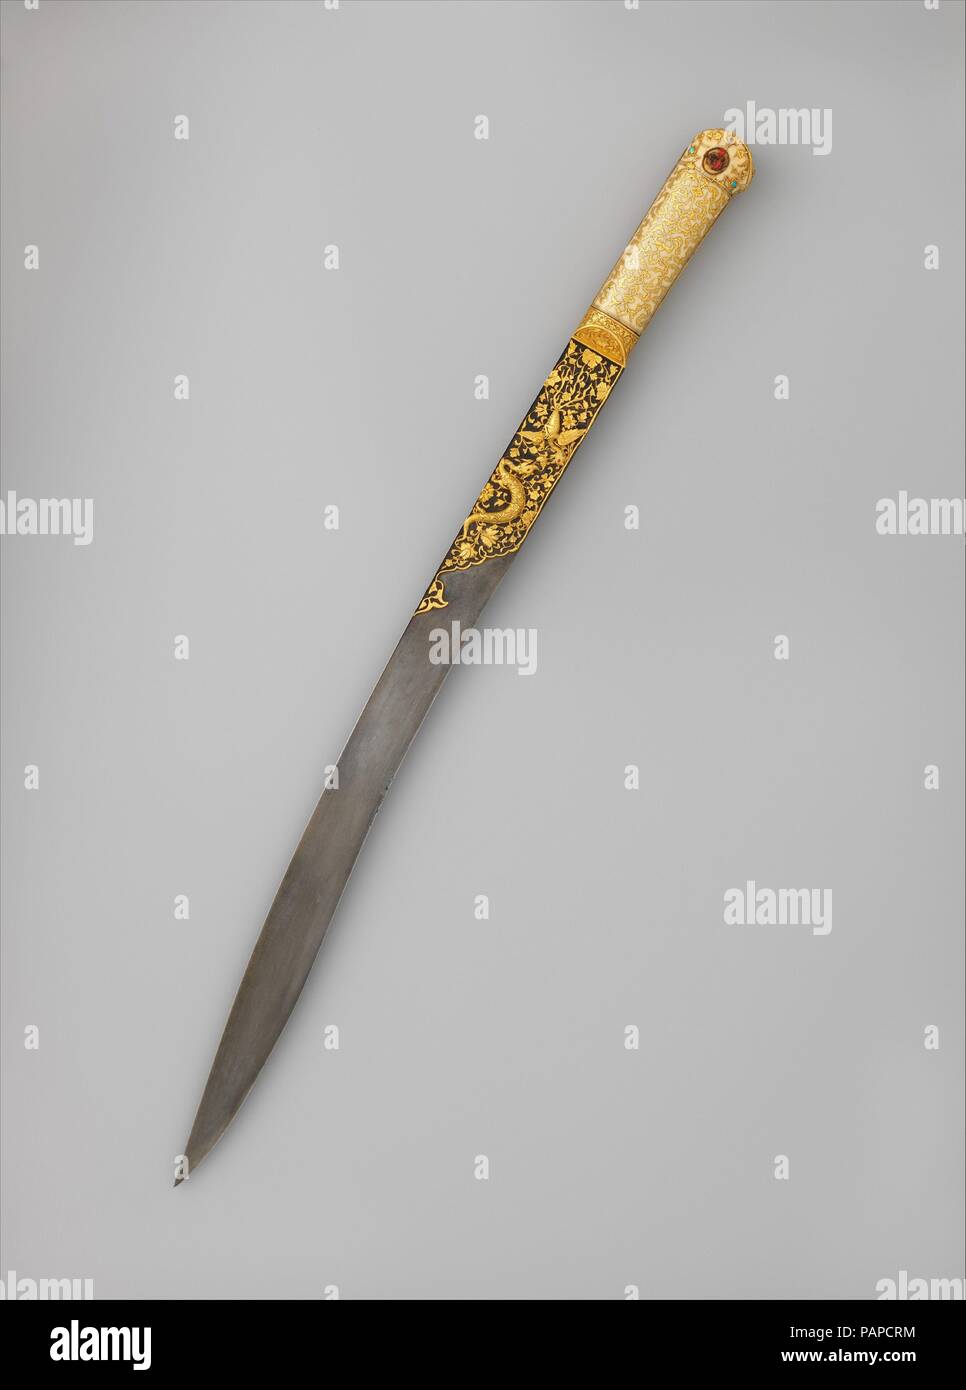 Workshop of Ahmed Tekelü, Short Sword (Yatagan) from the Court of Süleyman  the Magnificent (reigned 1520–66), Turkish, Istanbul